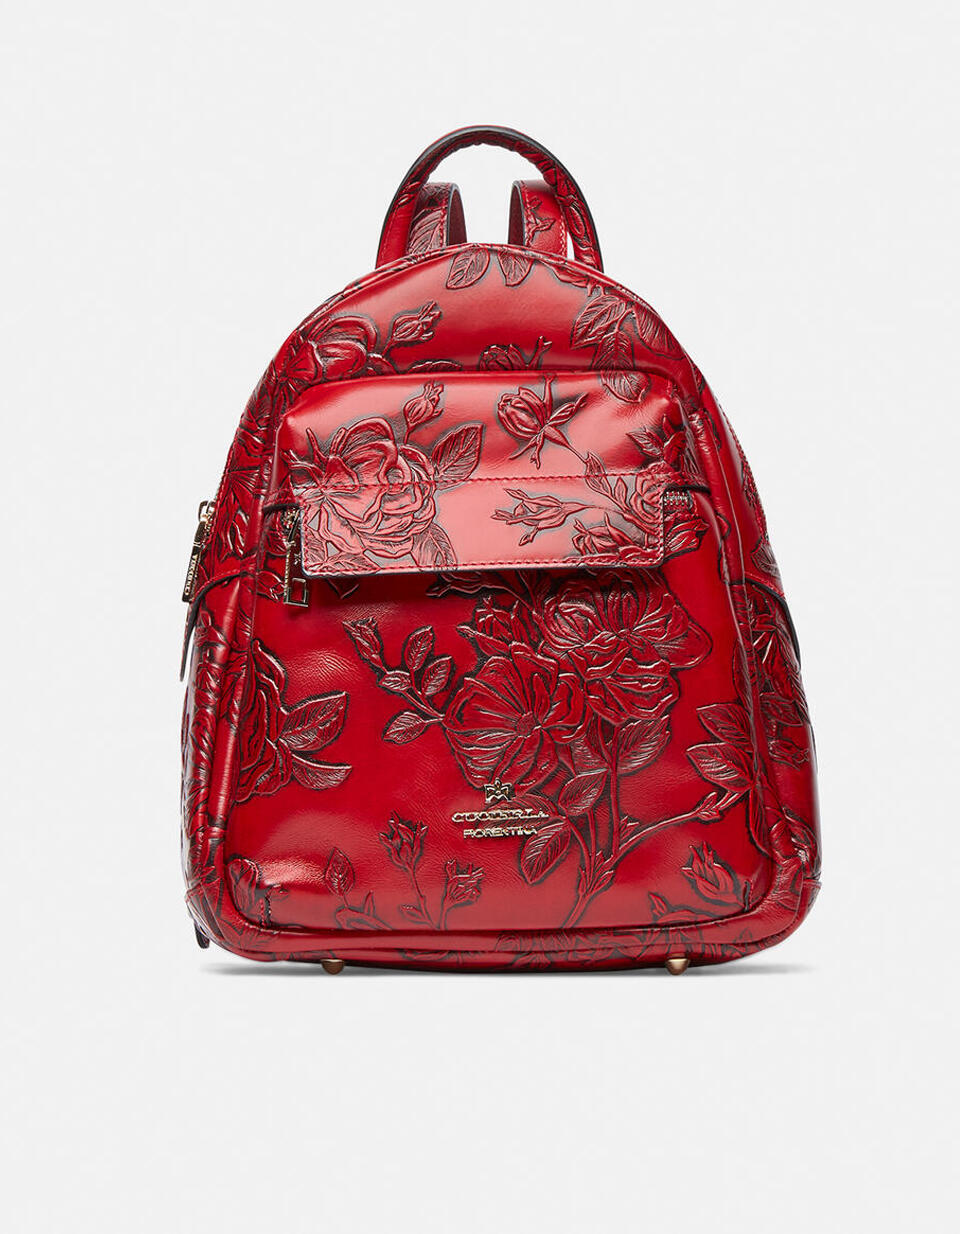 Backpack Red  - Backpacks - Women's Bags - Bags - Cuoieria Fiorentina